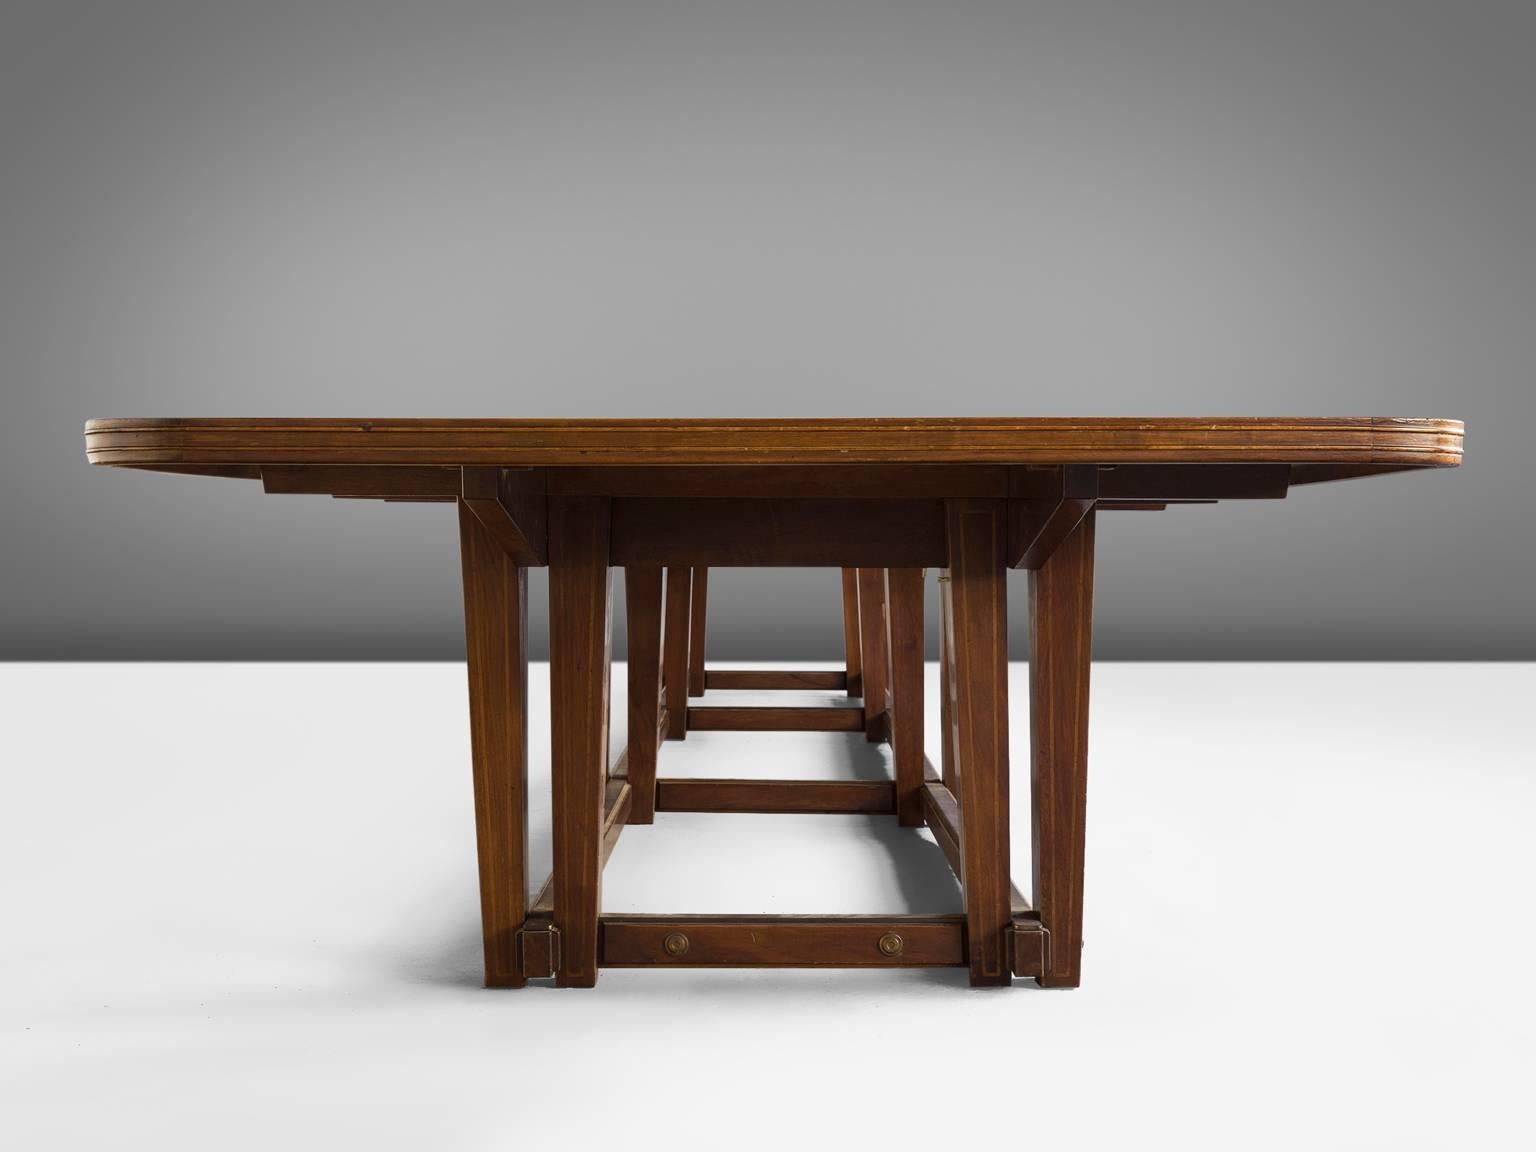 European Large Conference Table in Walnut with Inlay